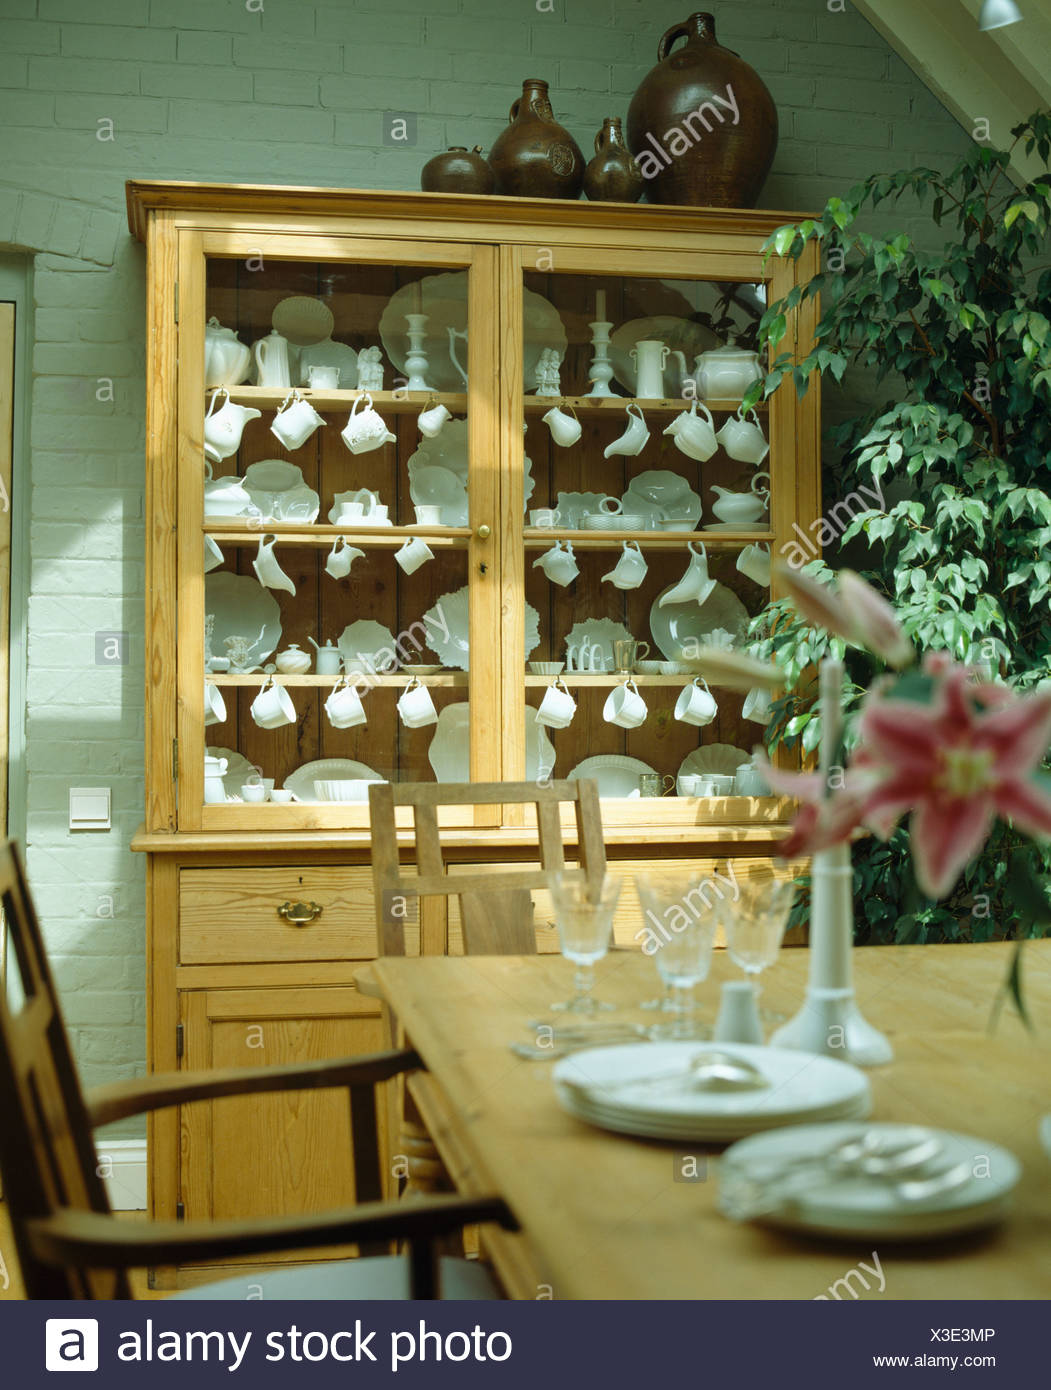 Collection Of White China On Shelves In Pine Dresser With Glazed